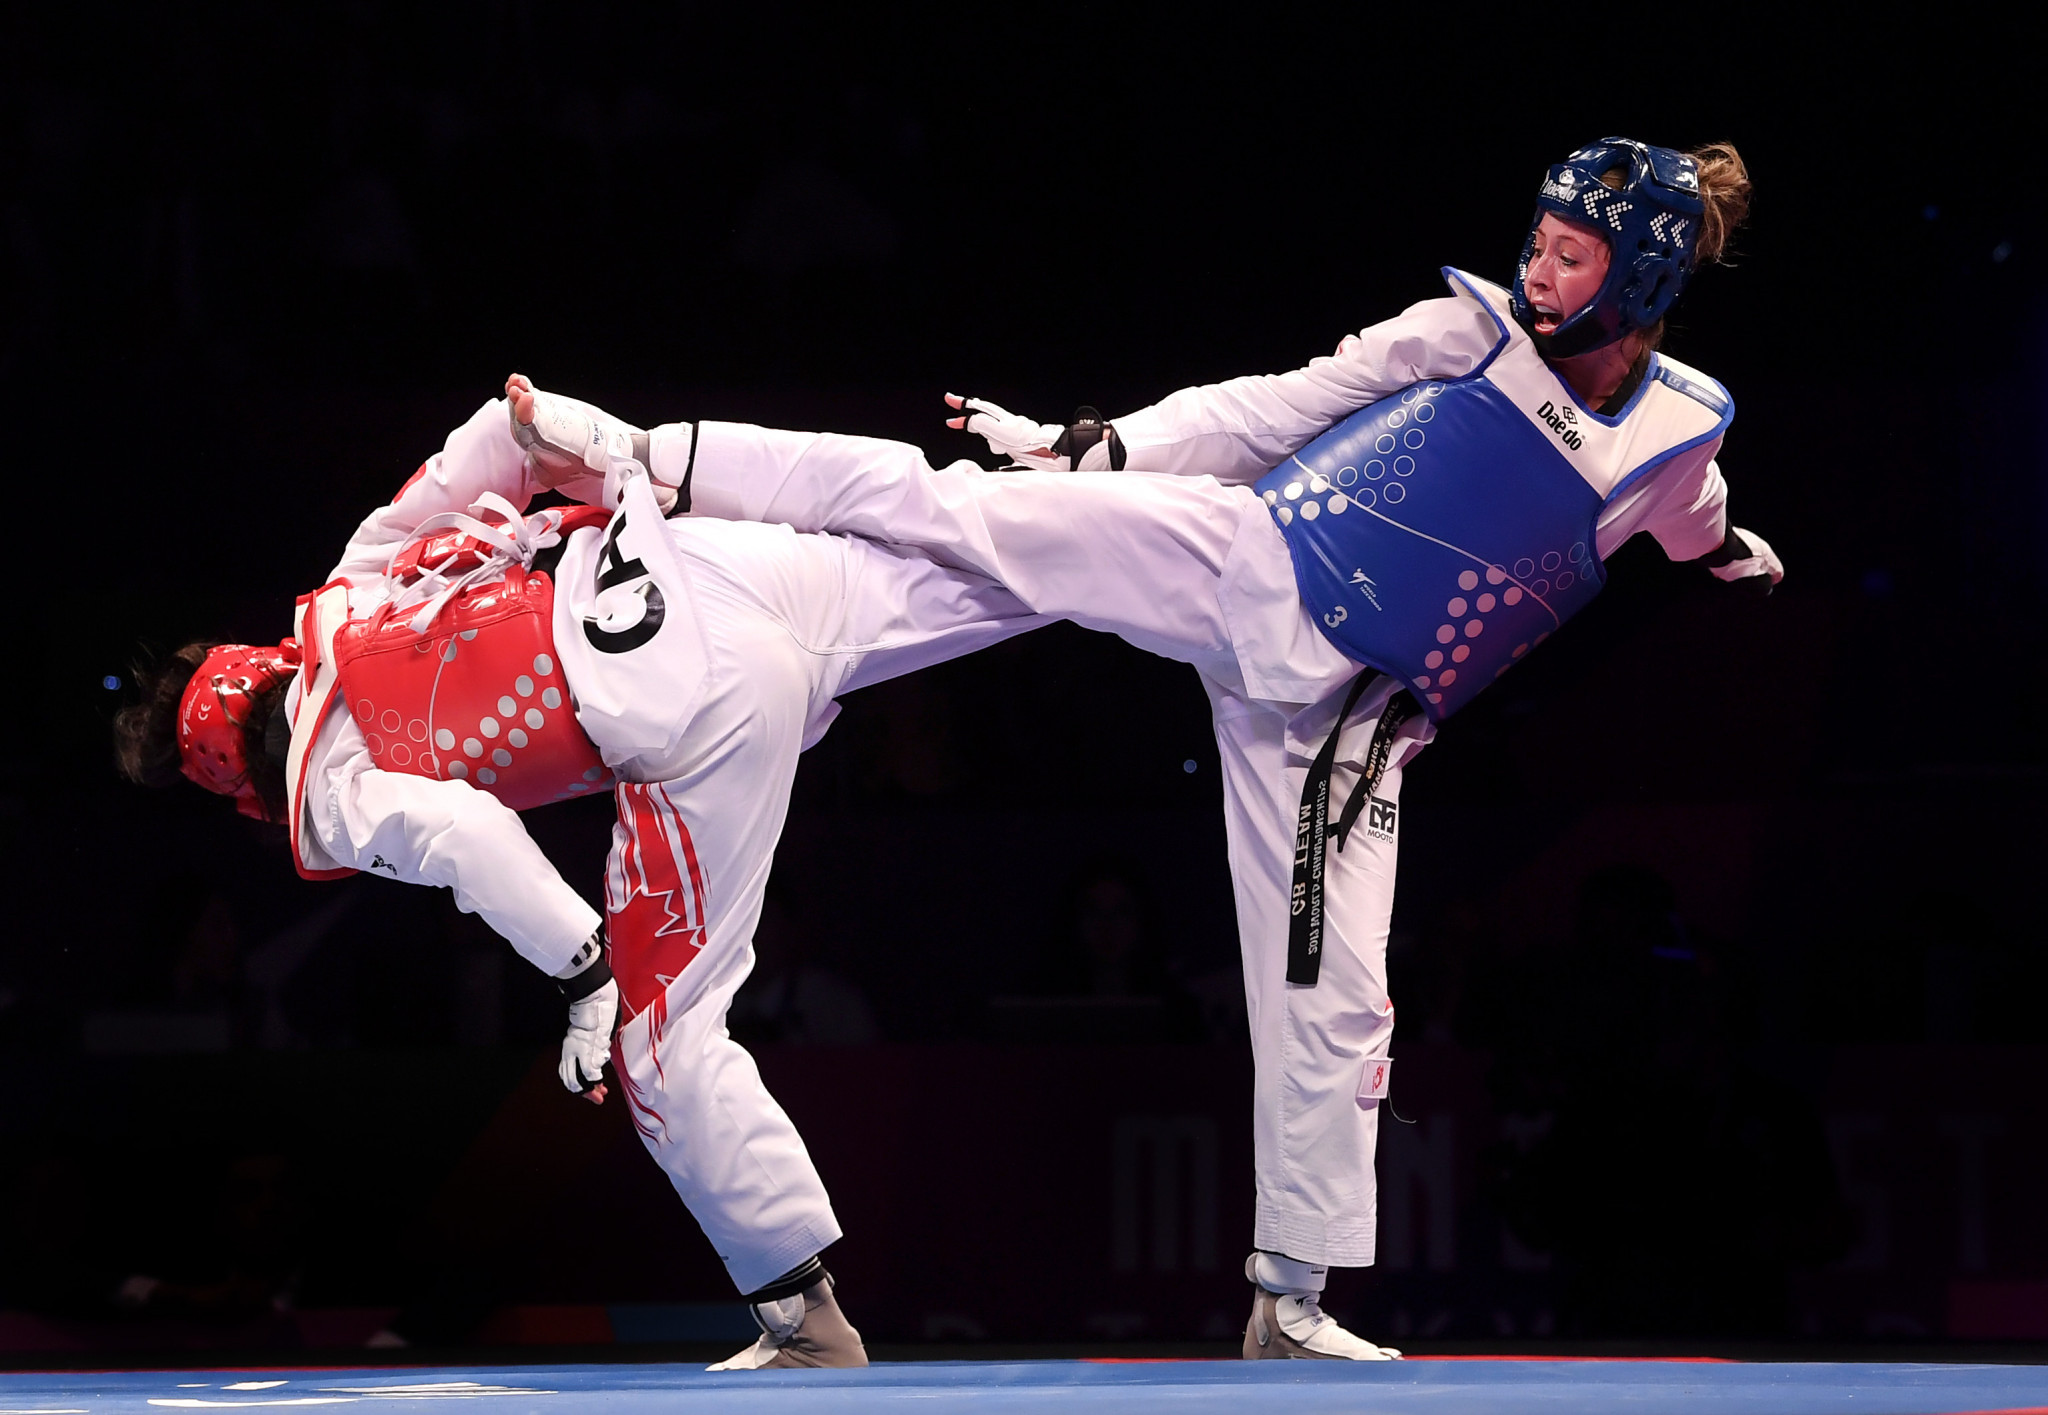 Ioannis Mouroutsos has taken on an important role in European taekwondo ©Getty Images